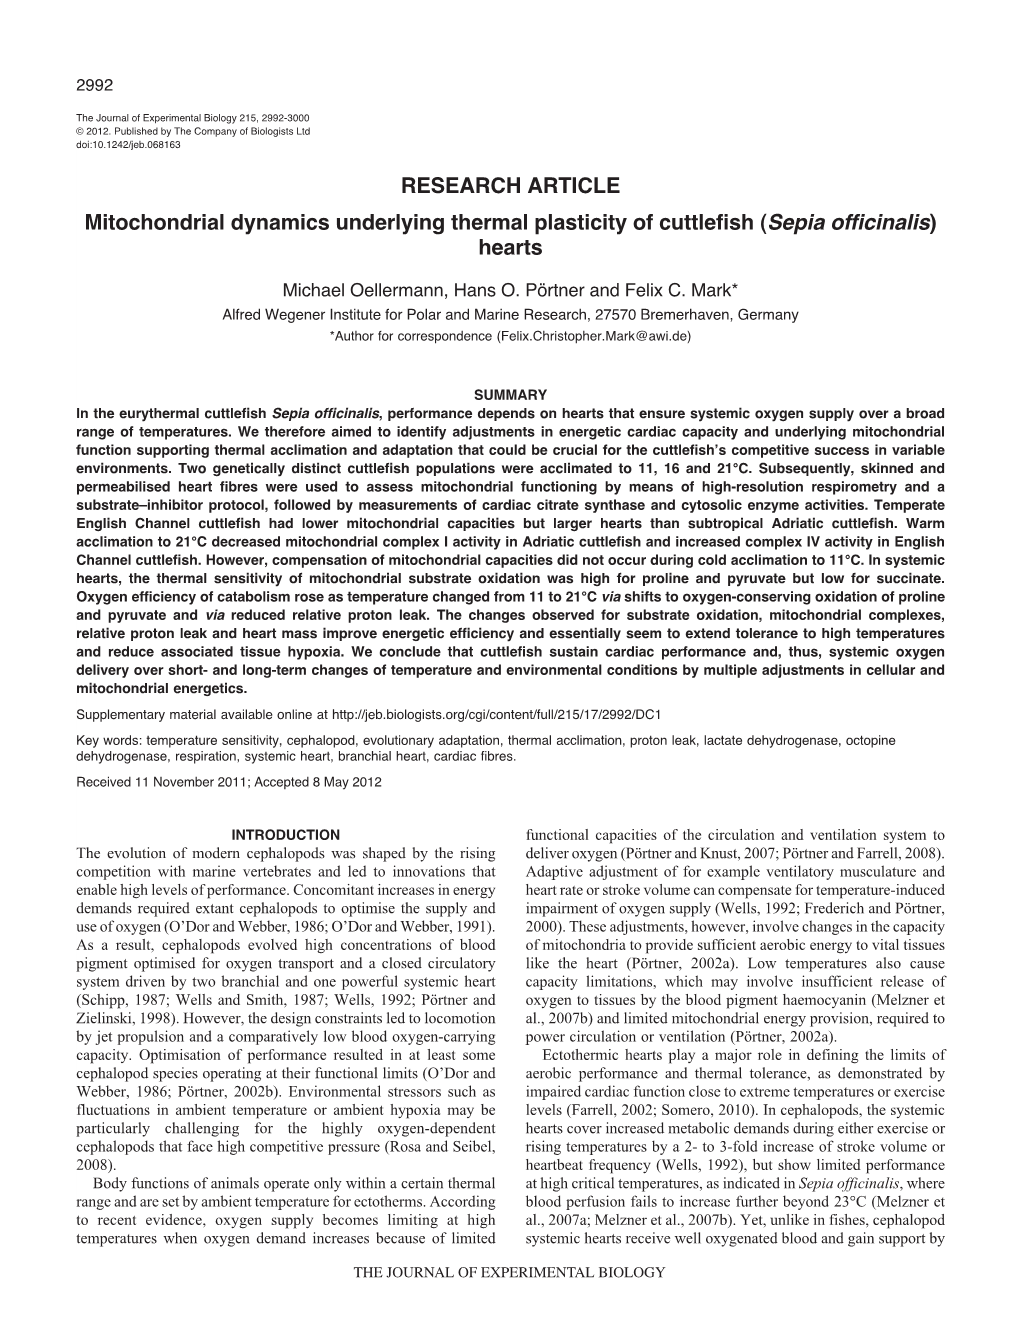 RESEARCH ARTICLE Mitochondrial Dynamics Underlying Thermal Plasticity of Cuttlefish (Sepia Officinalis) Hearts